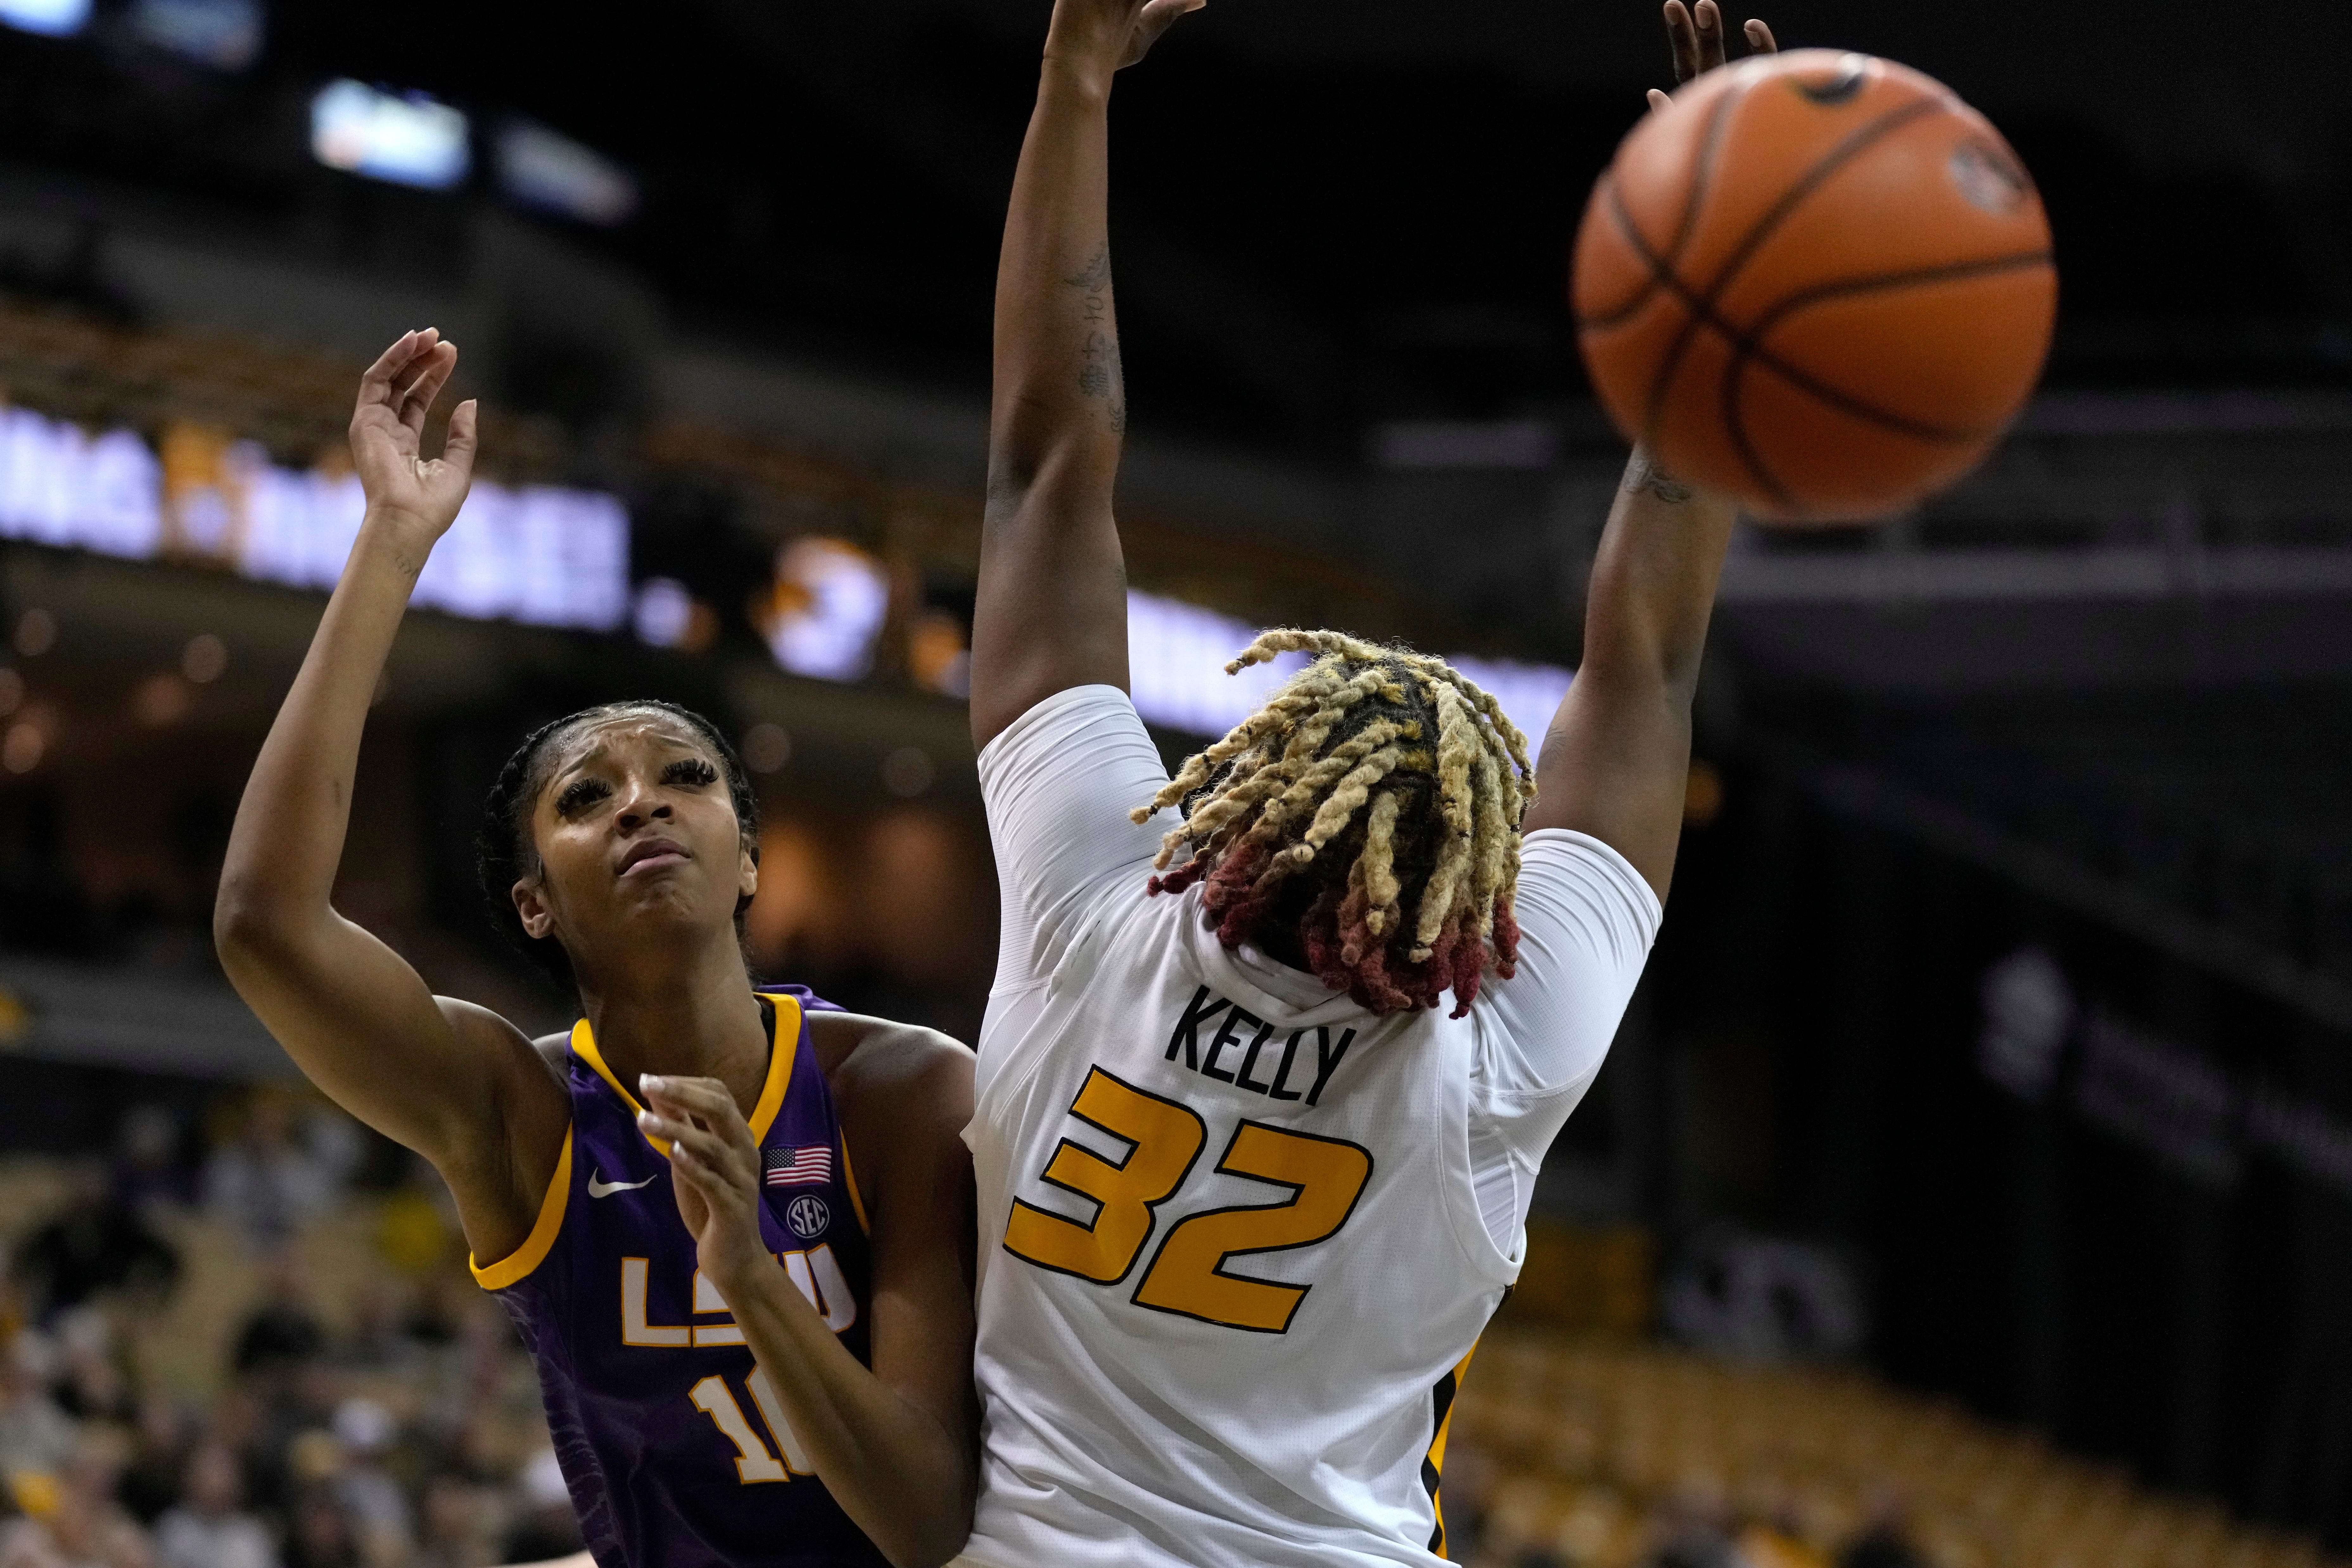 LSU's Angel Reese, left, loses the ball as she collides with Missouri's Jayla Kelly (32) during the second half of an NCAA college basketball game Thursday, Jan. 12, 2023, in Columbia, Mo. (AP Photo/Jeff Roberson)